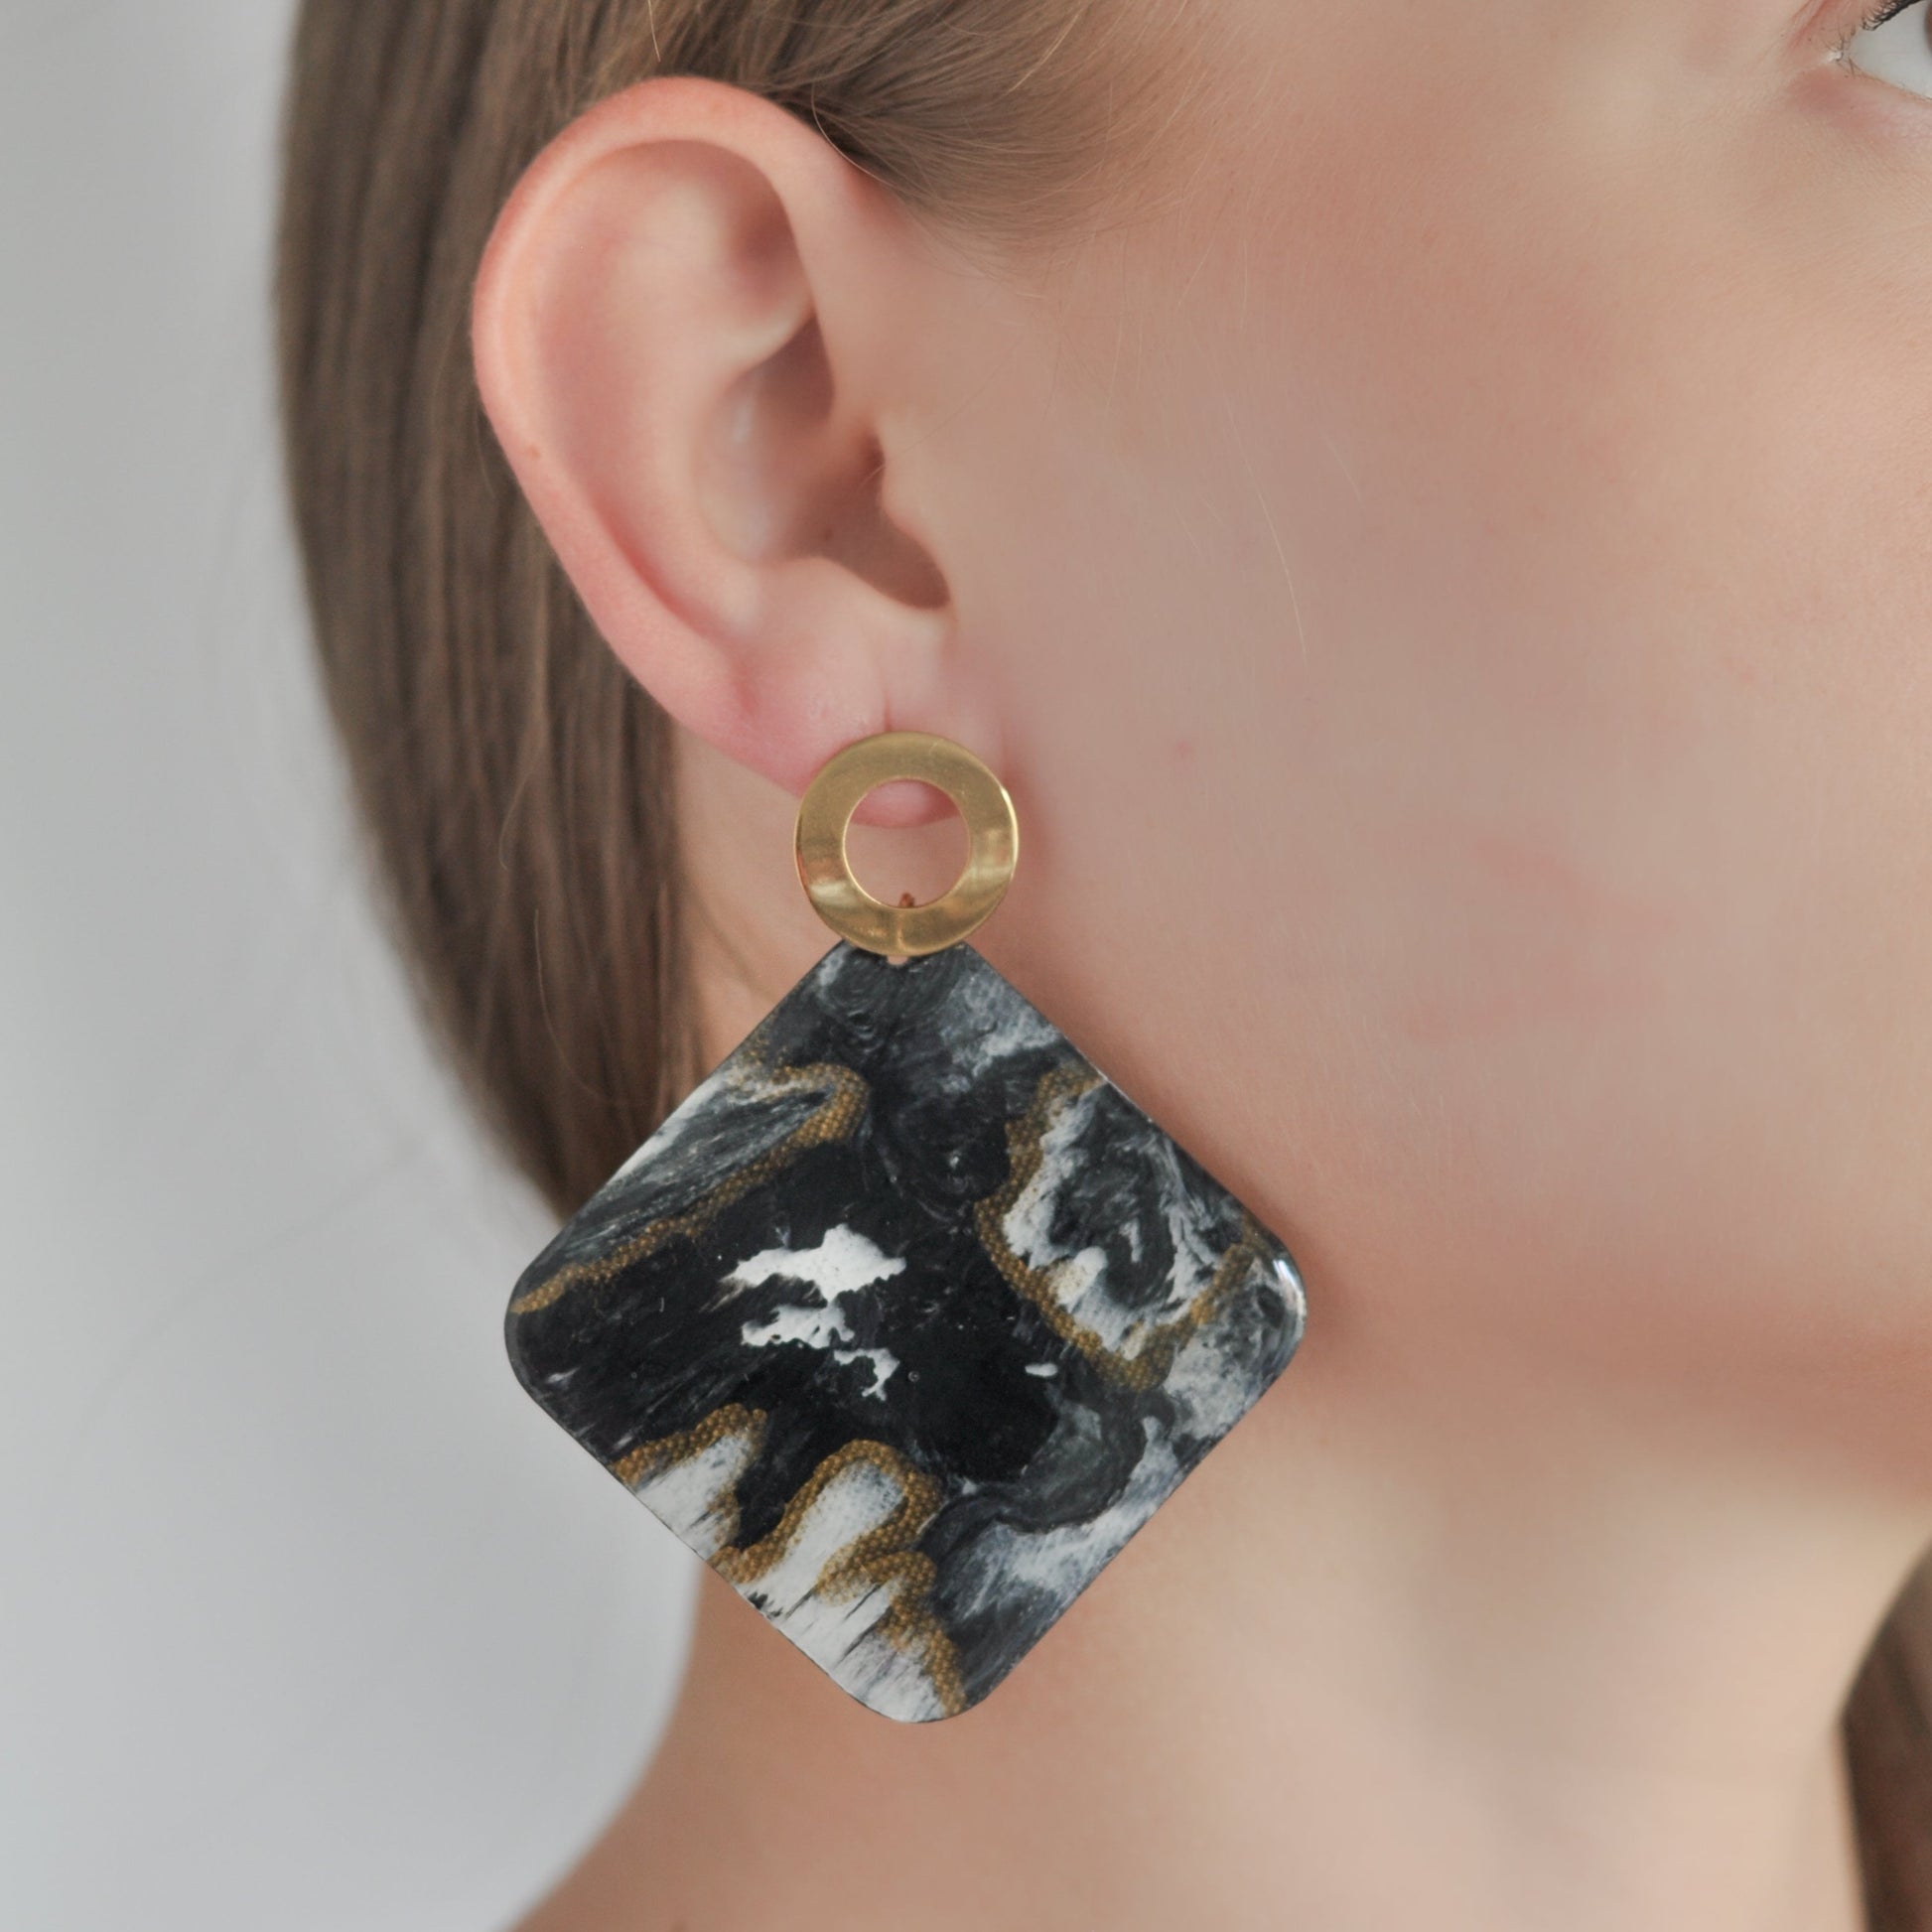 Recycled plastic Statement Large Studs Earrings Handcrafted Black White Gold from local waste